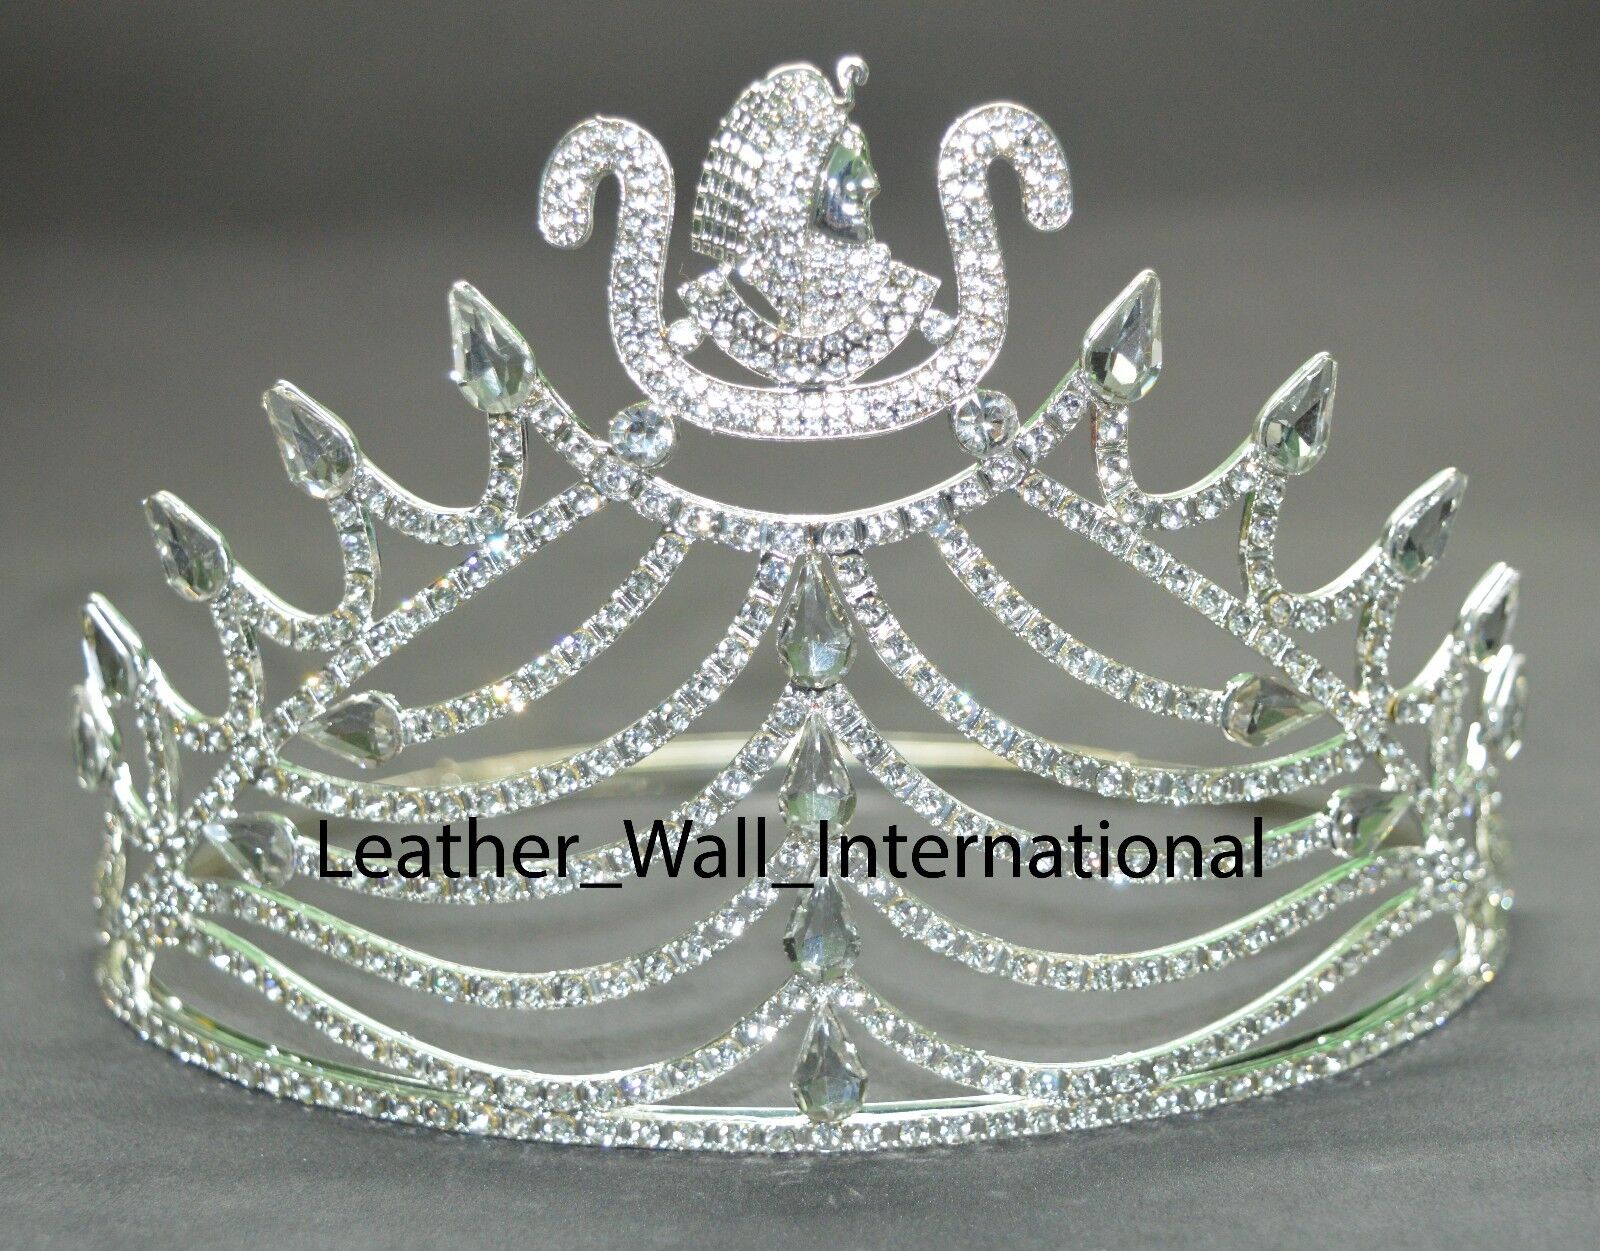 Daughter of Isis Crown in silver tone with all white rhinestones, DOI CROWN 